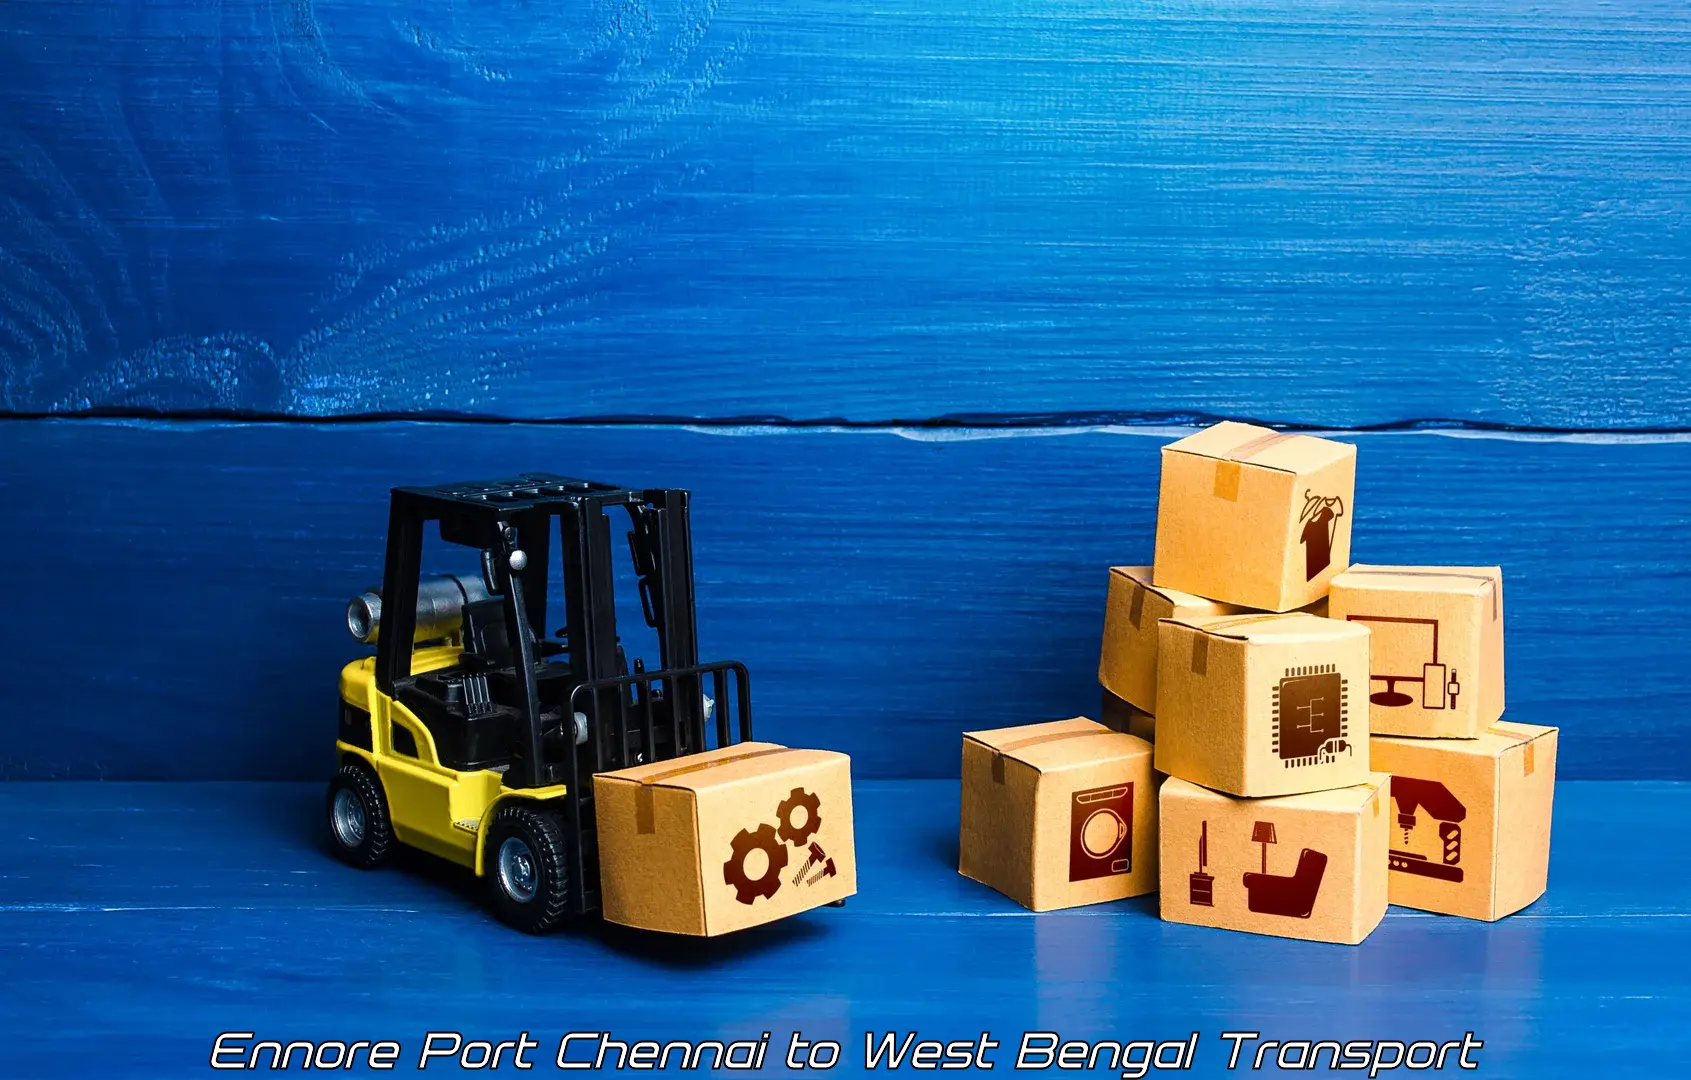 Part load transport service in India Ennore Port Chennai to Barrackpore